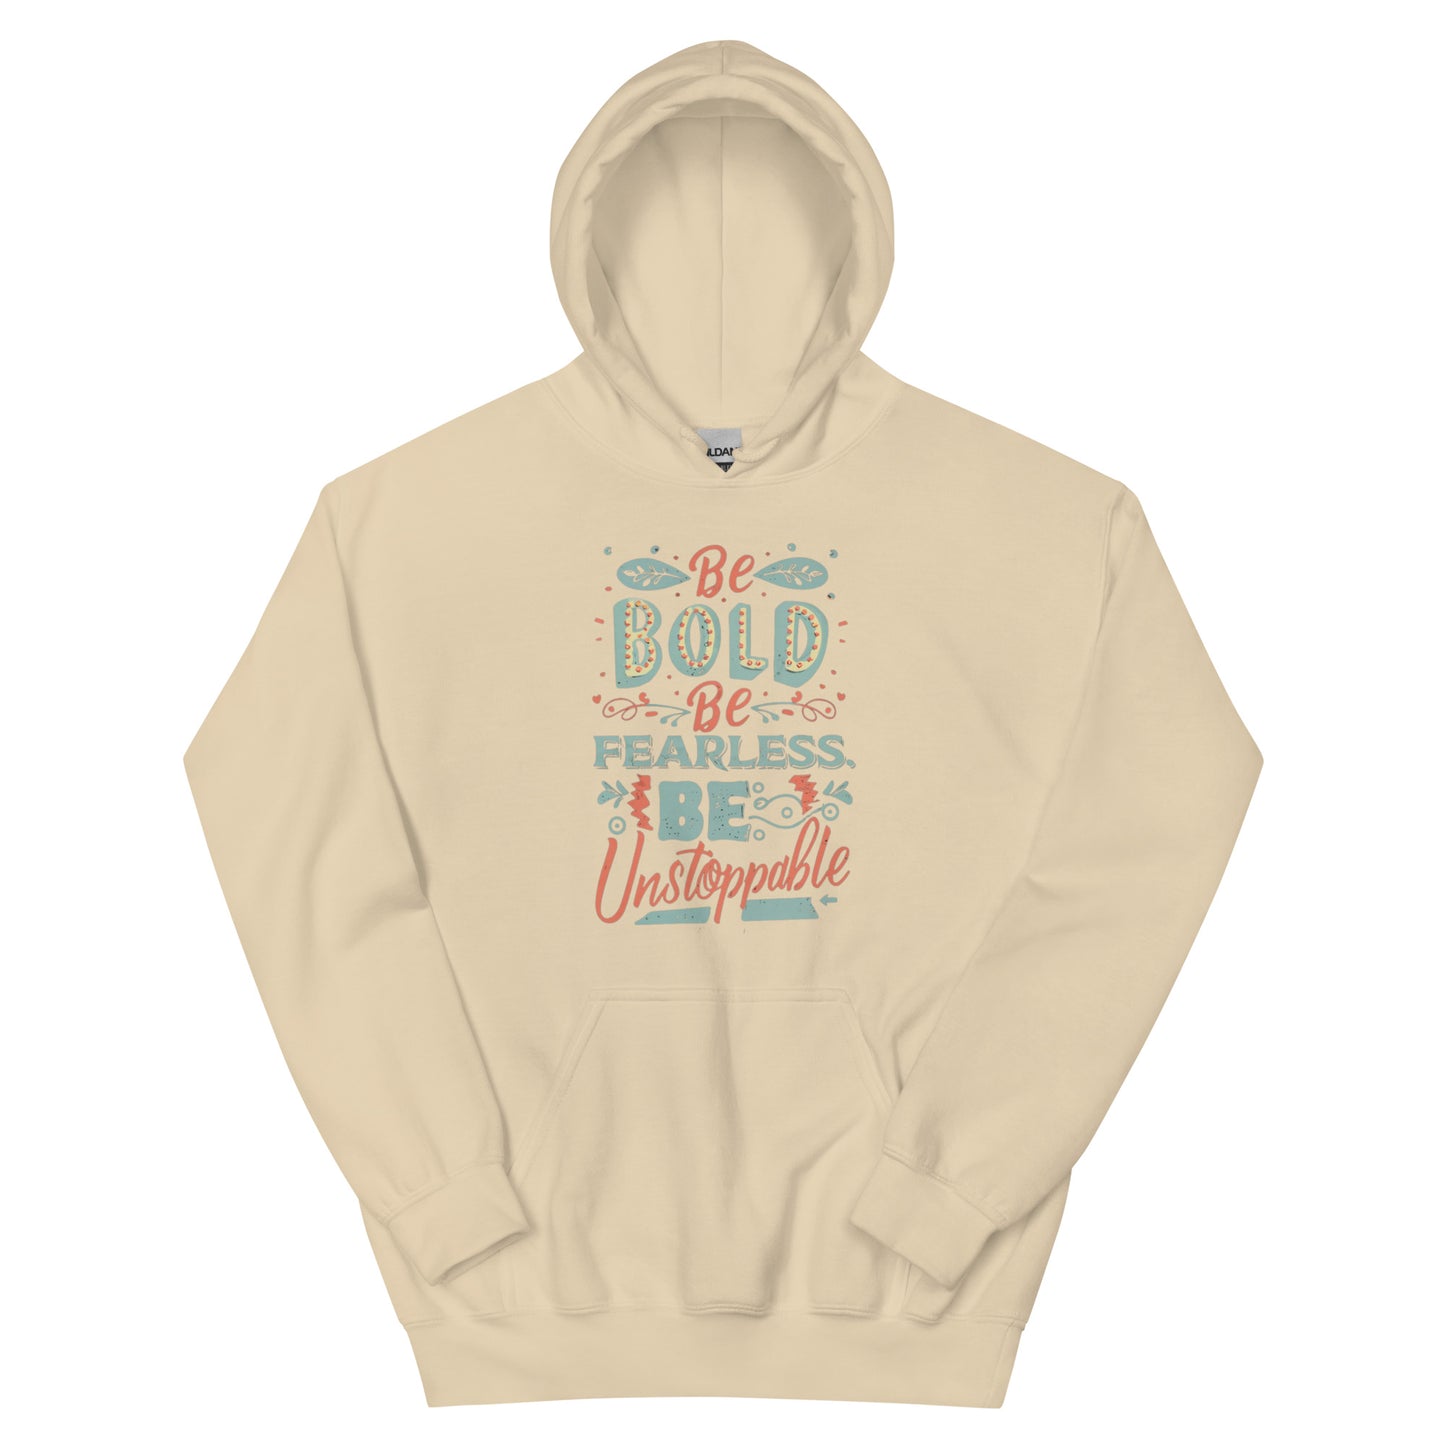 BE BOLD BE FEARLESS BE UNSTOPPABLE - Unisex Hoodie